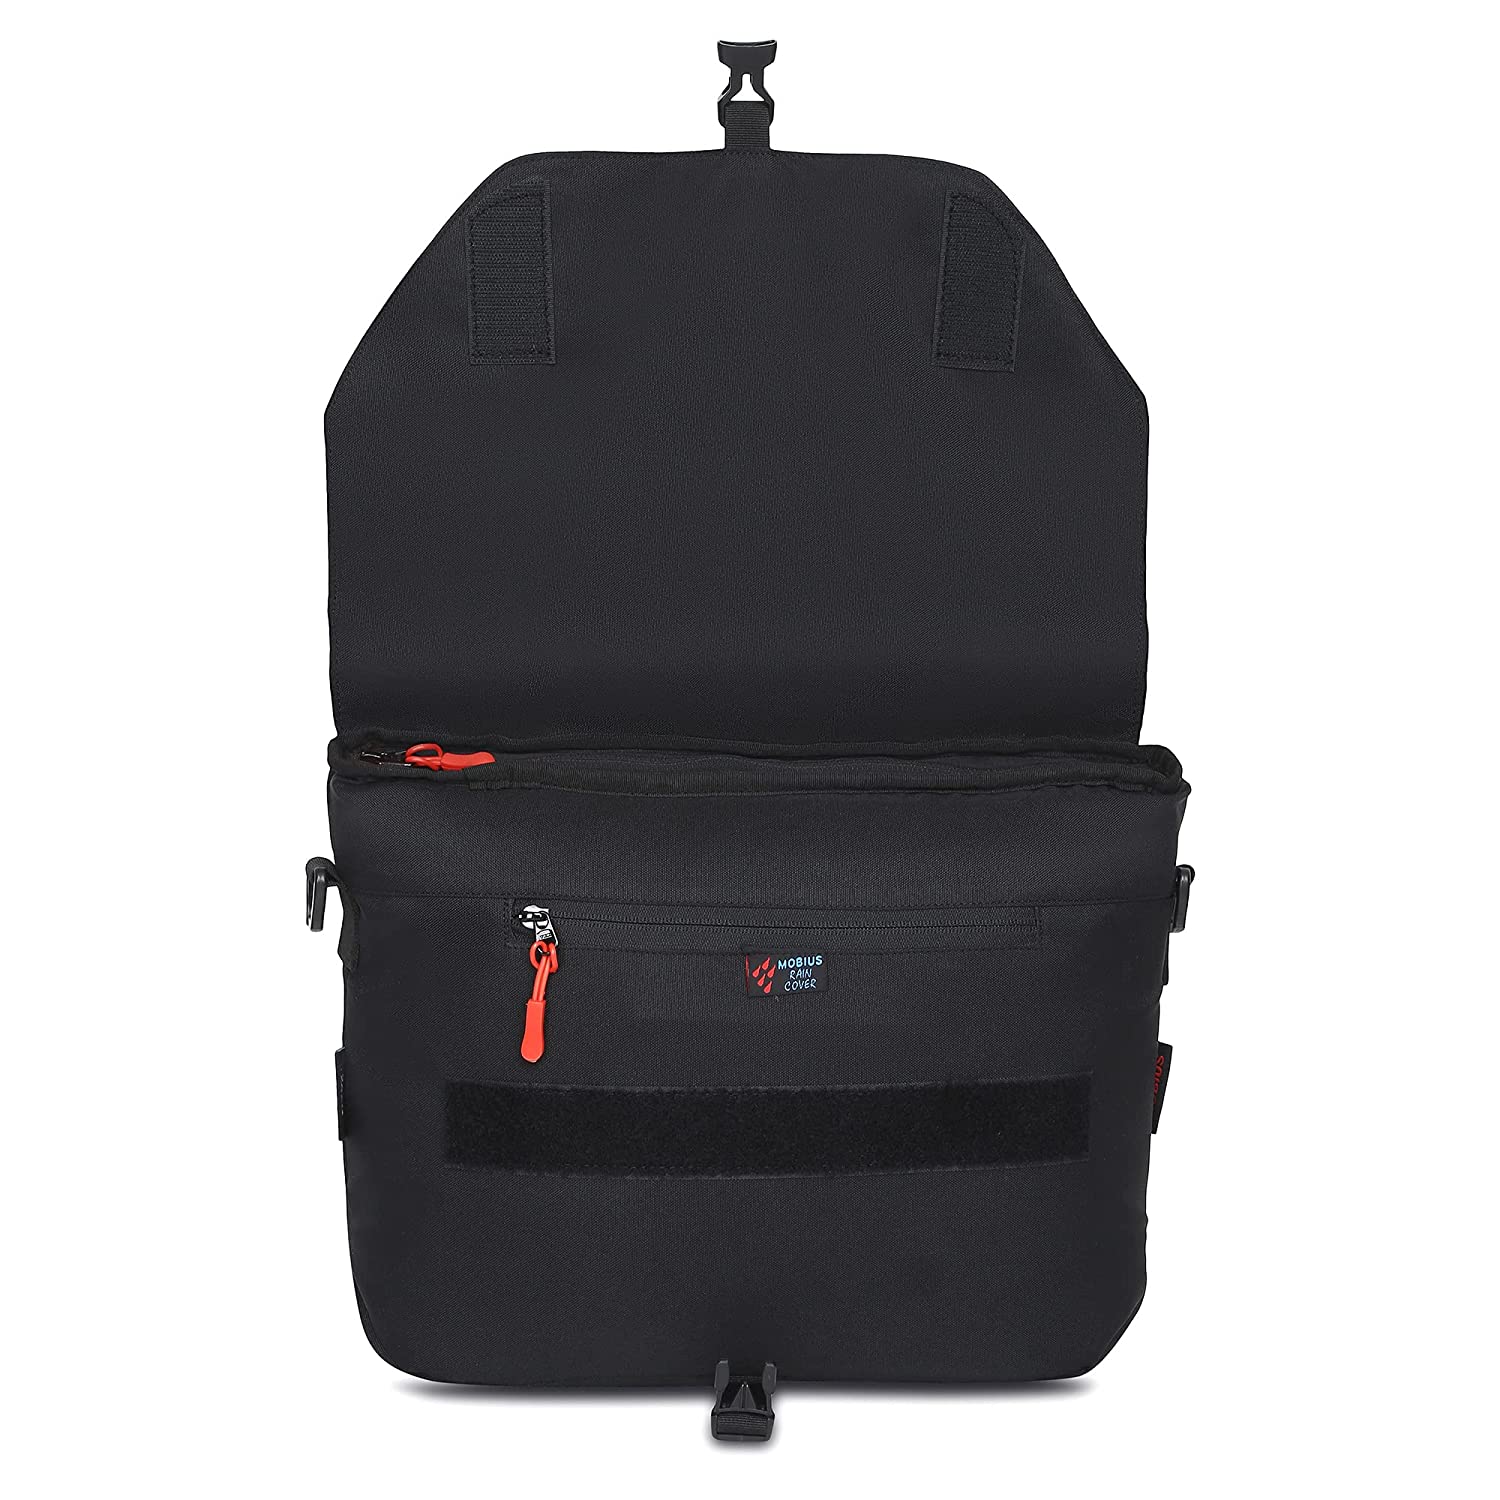 Buy MOBIUS Trensetter DSLR Backpack Bag for Camera with Rain Cover|100%  Waterproof Camera Bag with 15.4Inch Laptop Compartment, Tripod  Holder|Suitable for 18-135/85mm-F1 8/70-200 lenses Flash Charger Slot  Online at Low Prices in